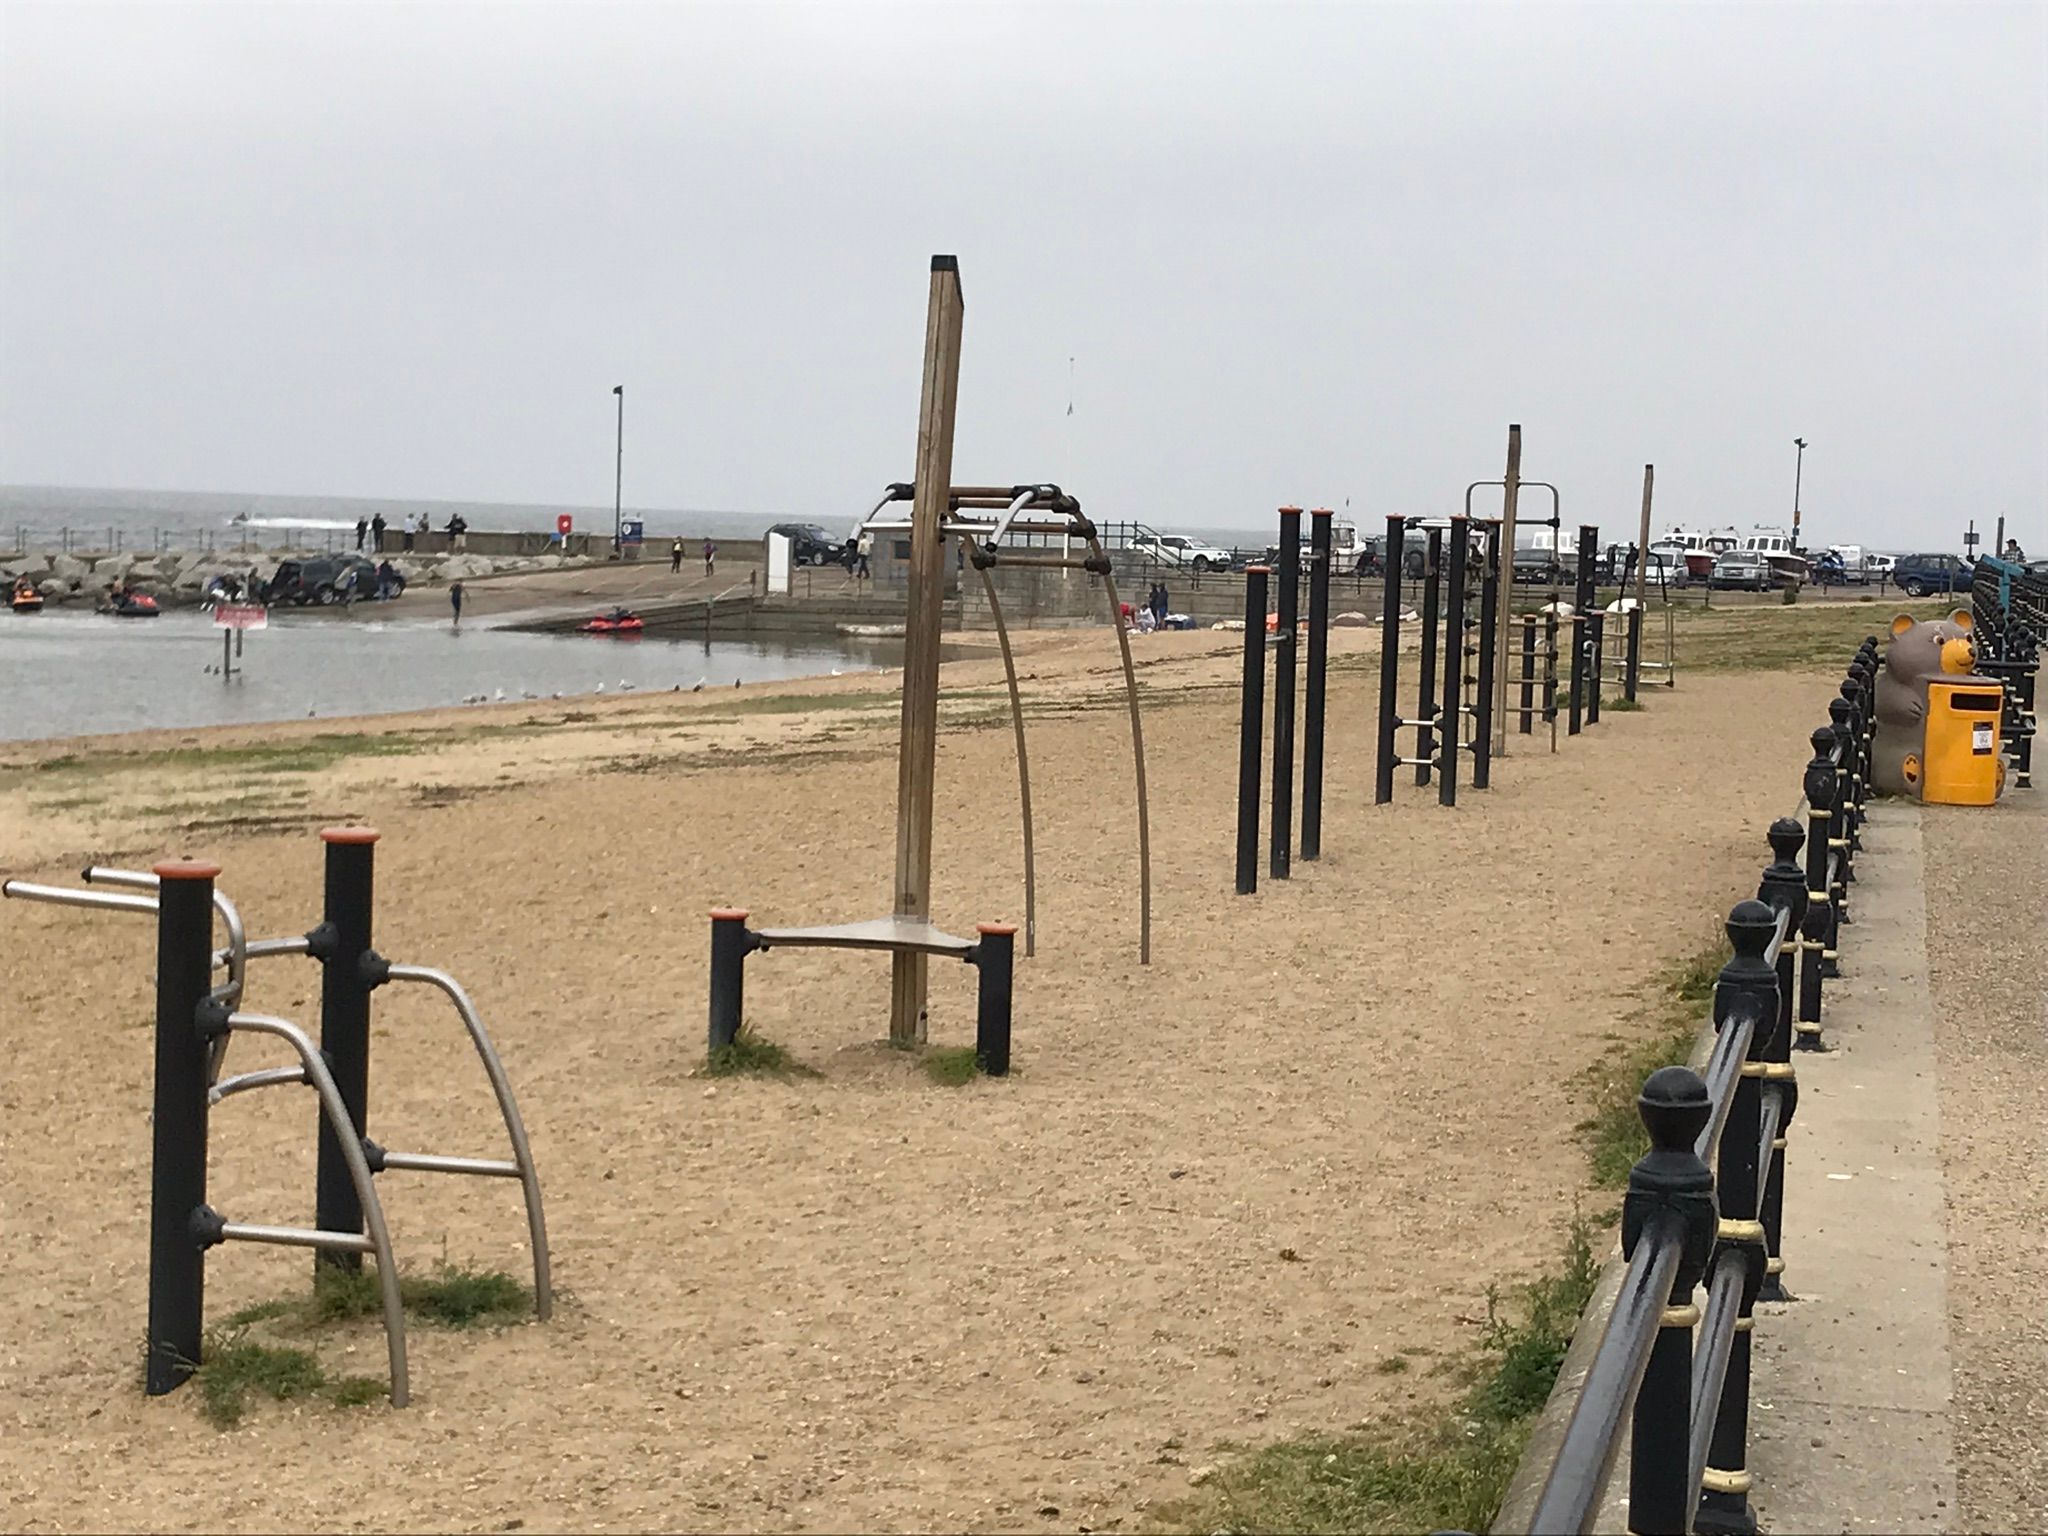 Gym and assault course style equipment on the beach.